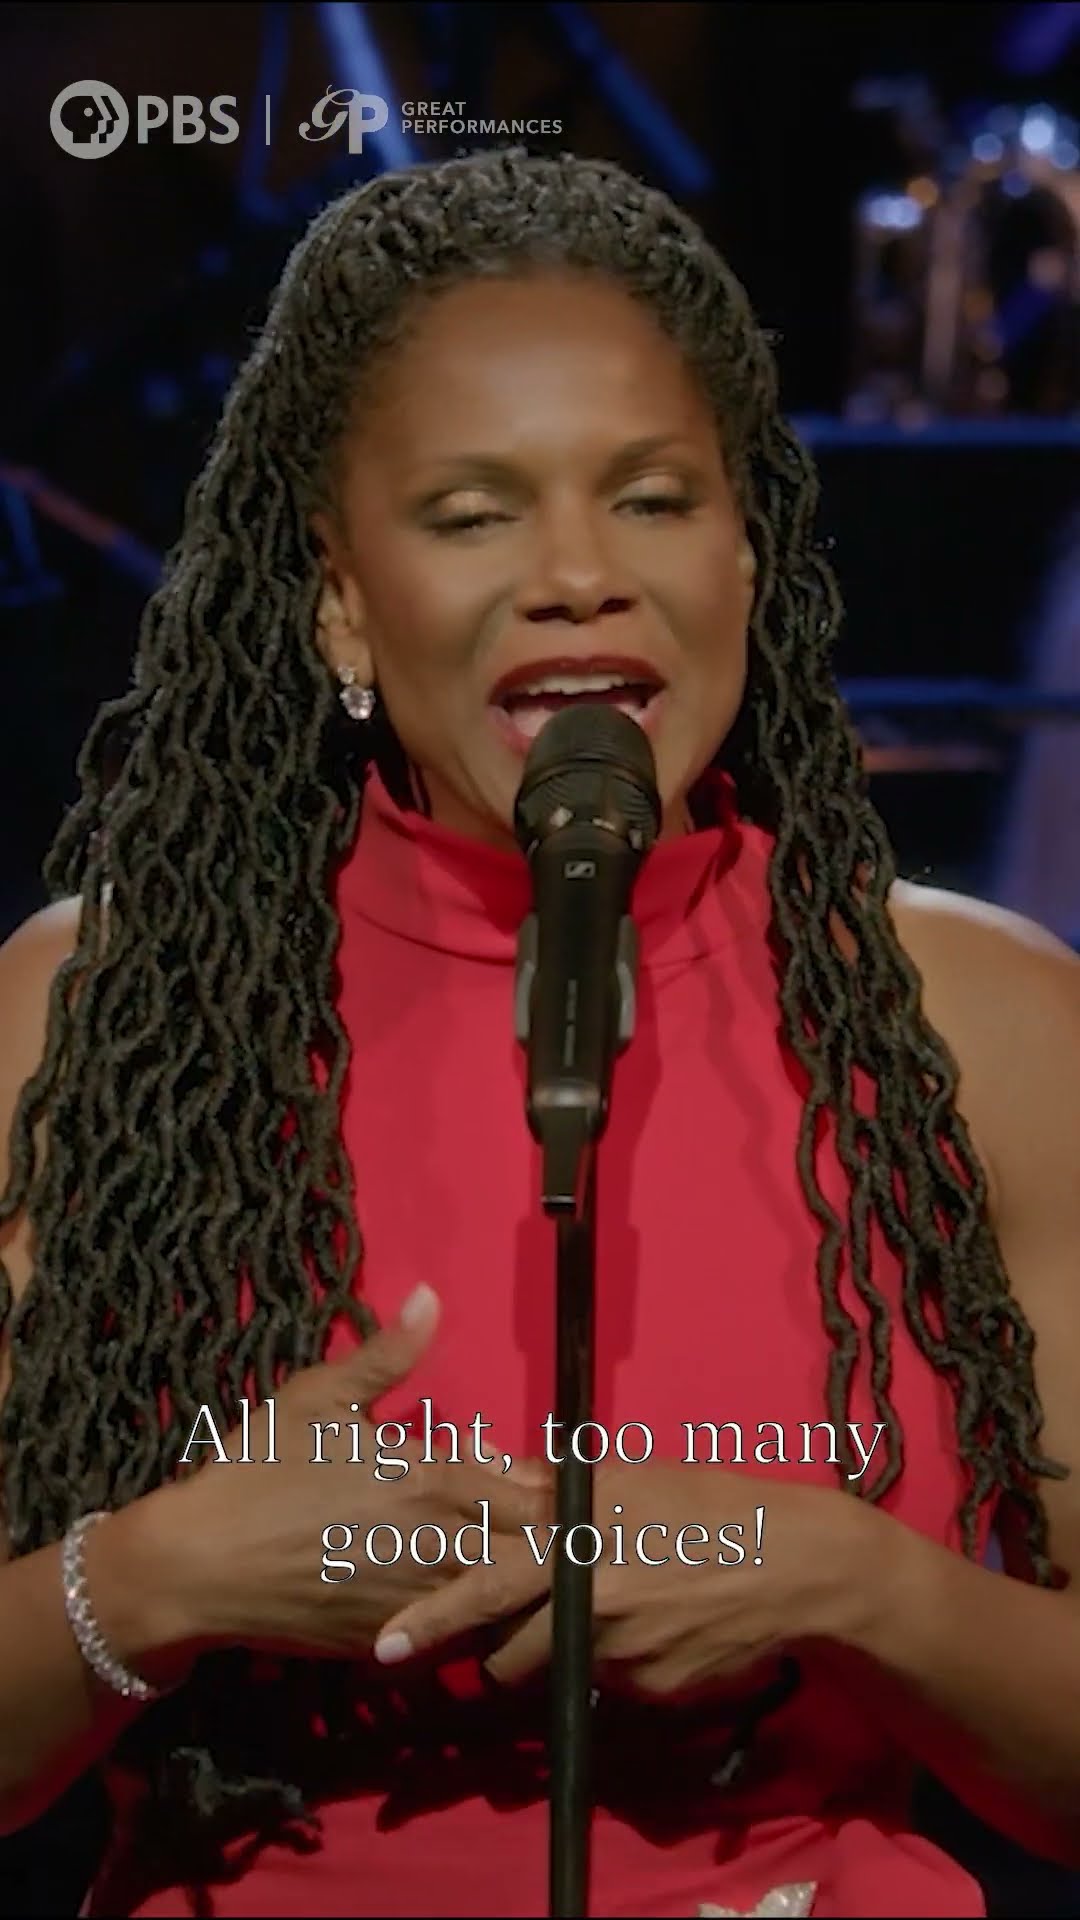 Sing "I Could Have Danced All Night" with Audra McDonald! Great Performances on PBS #shorts